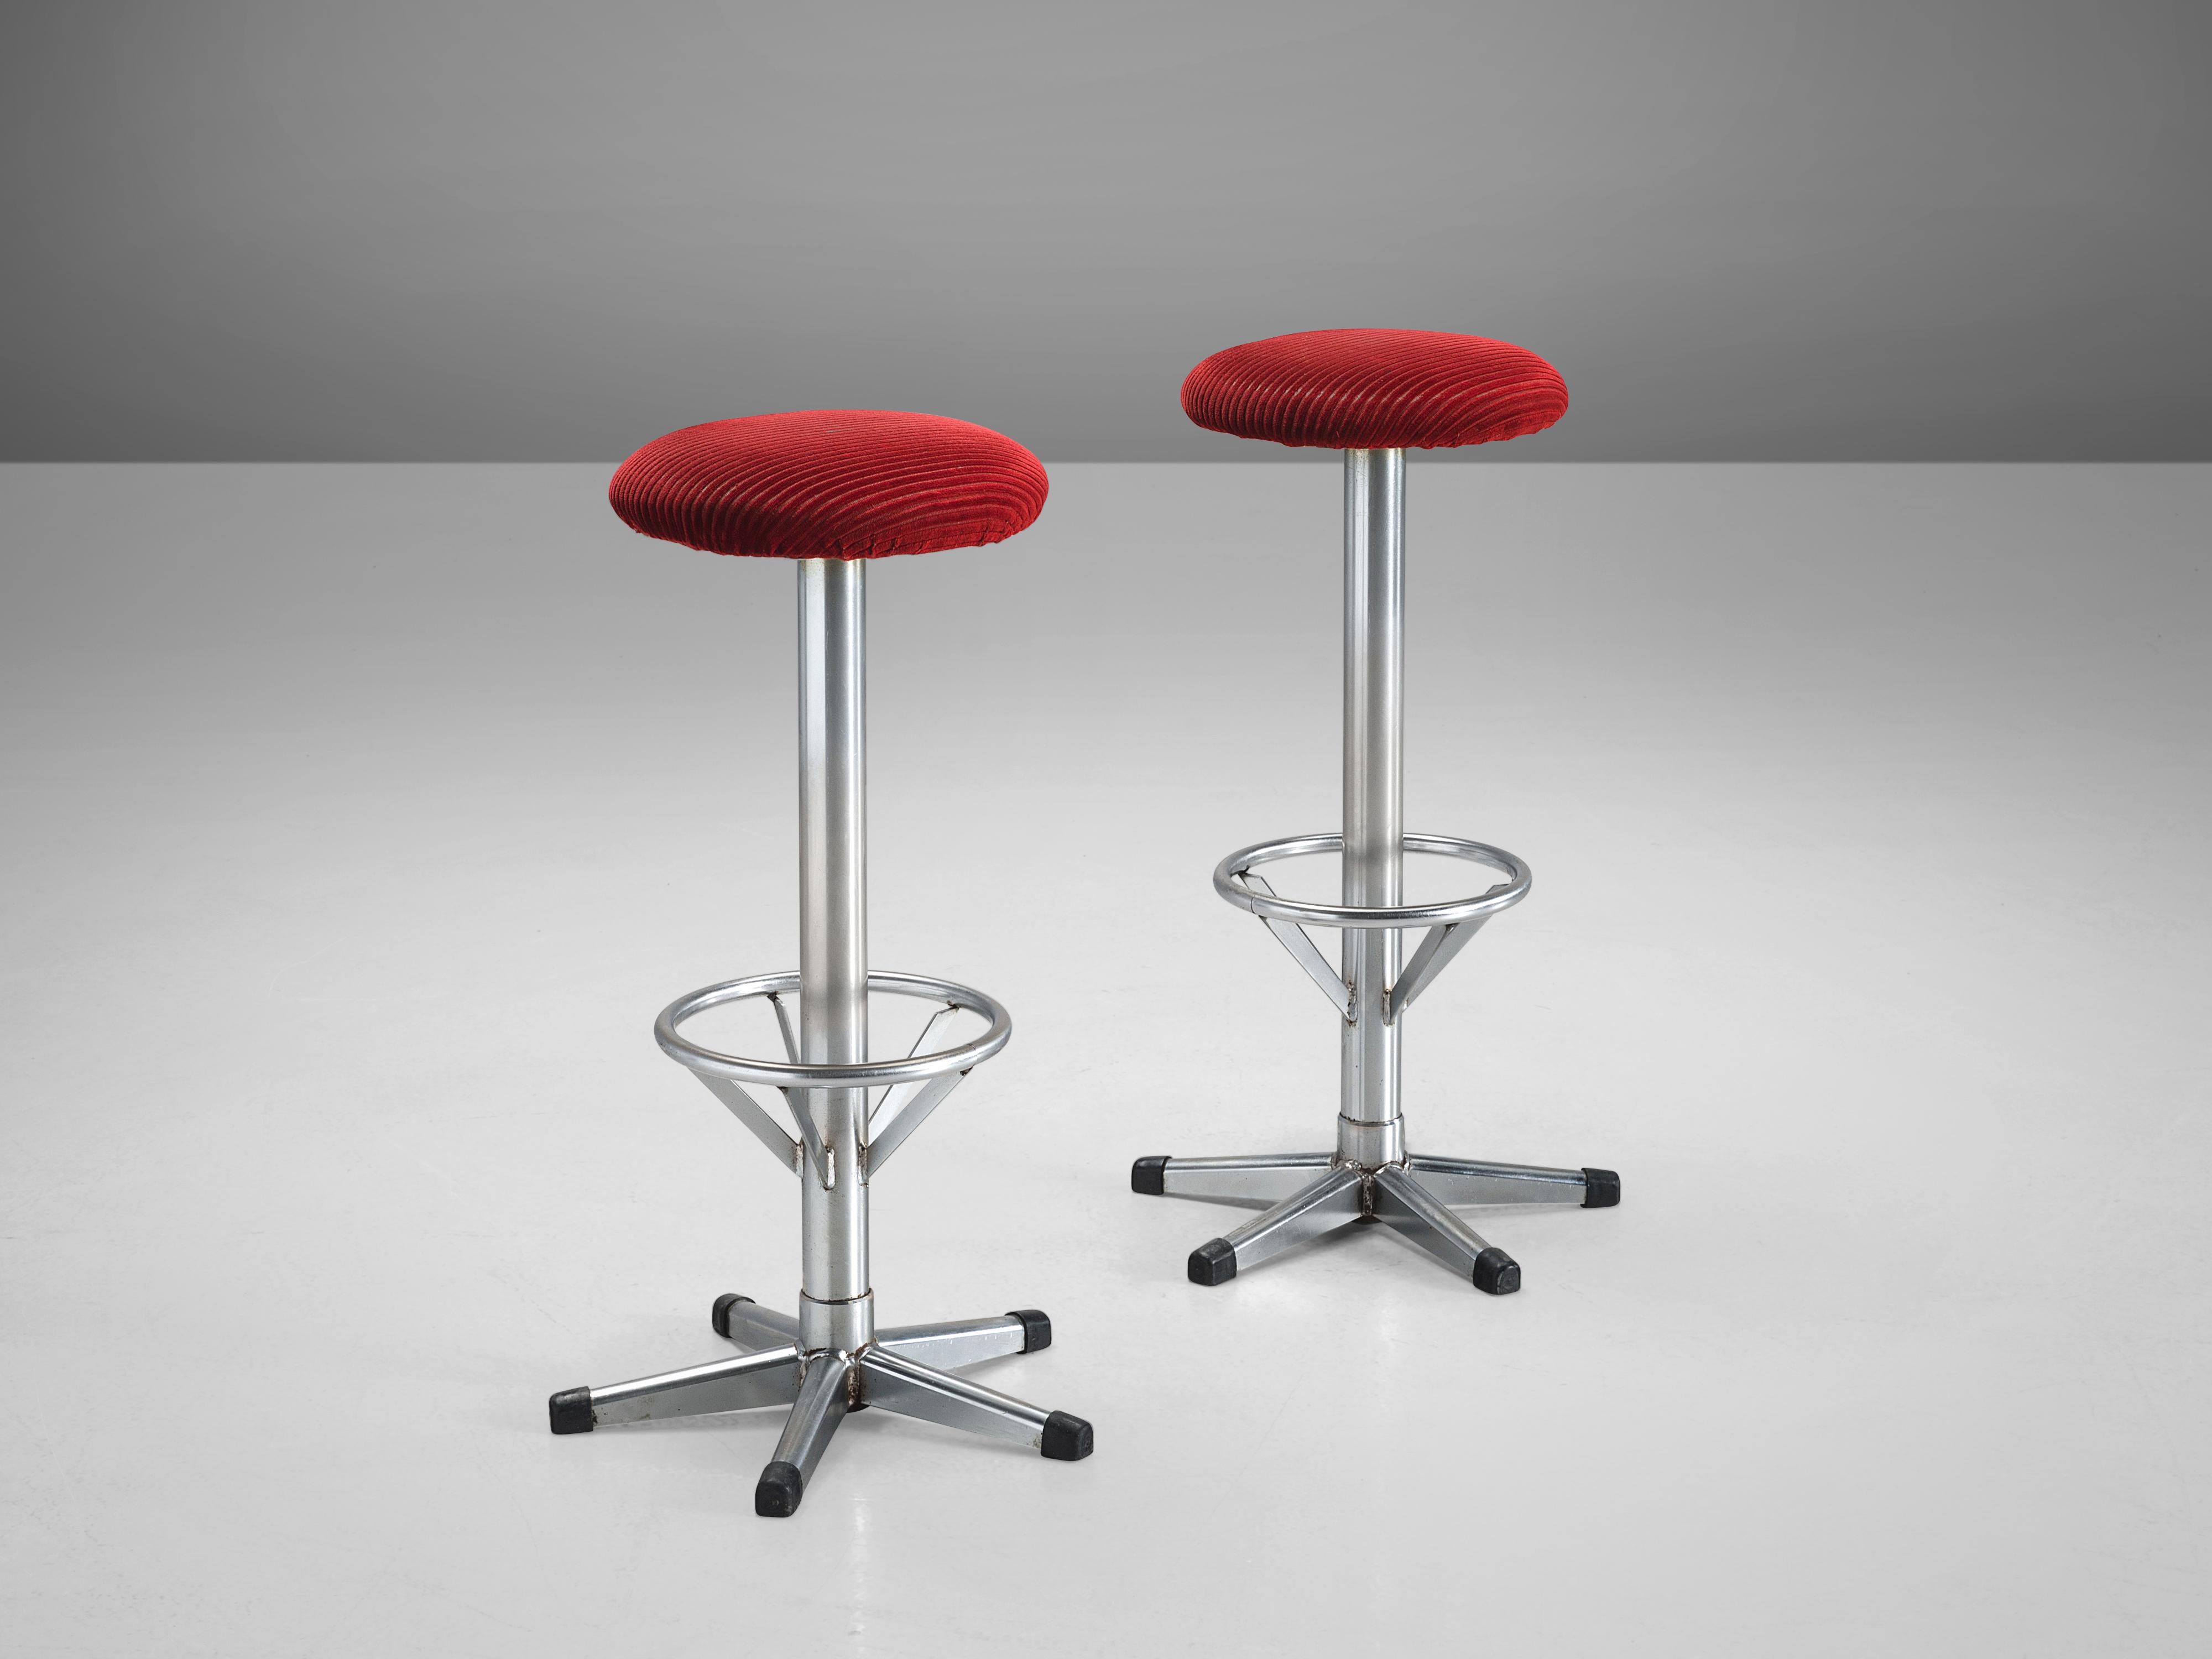 European Bar Stools in Metal and Red Corduroy Upholstery